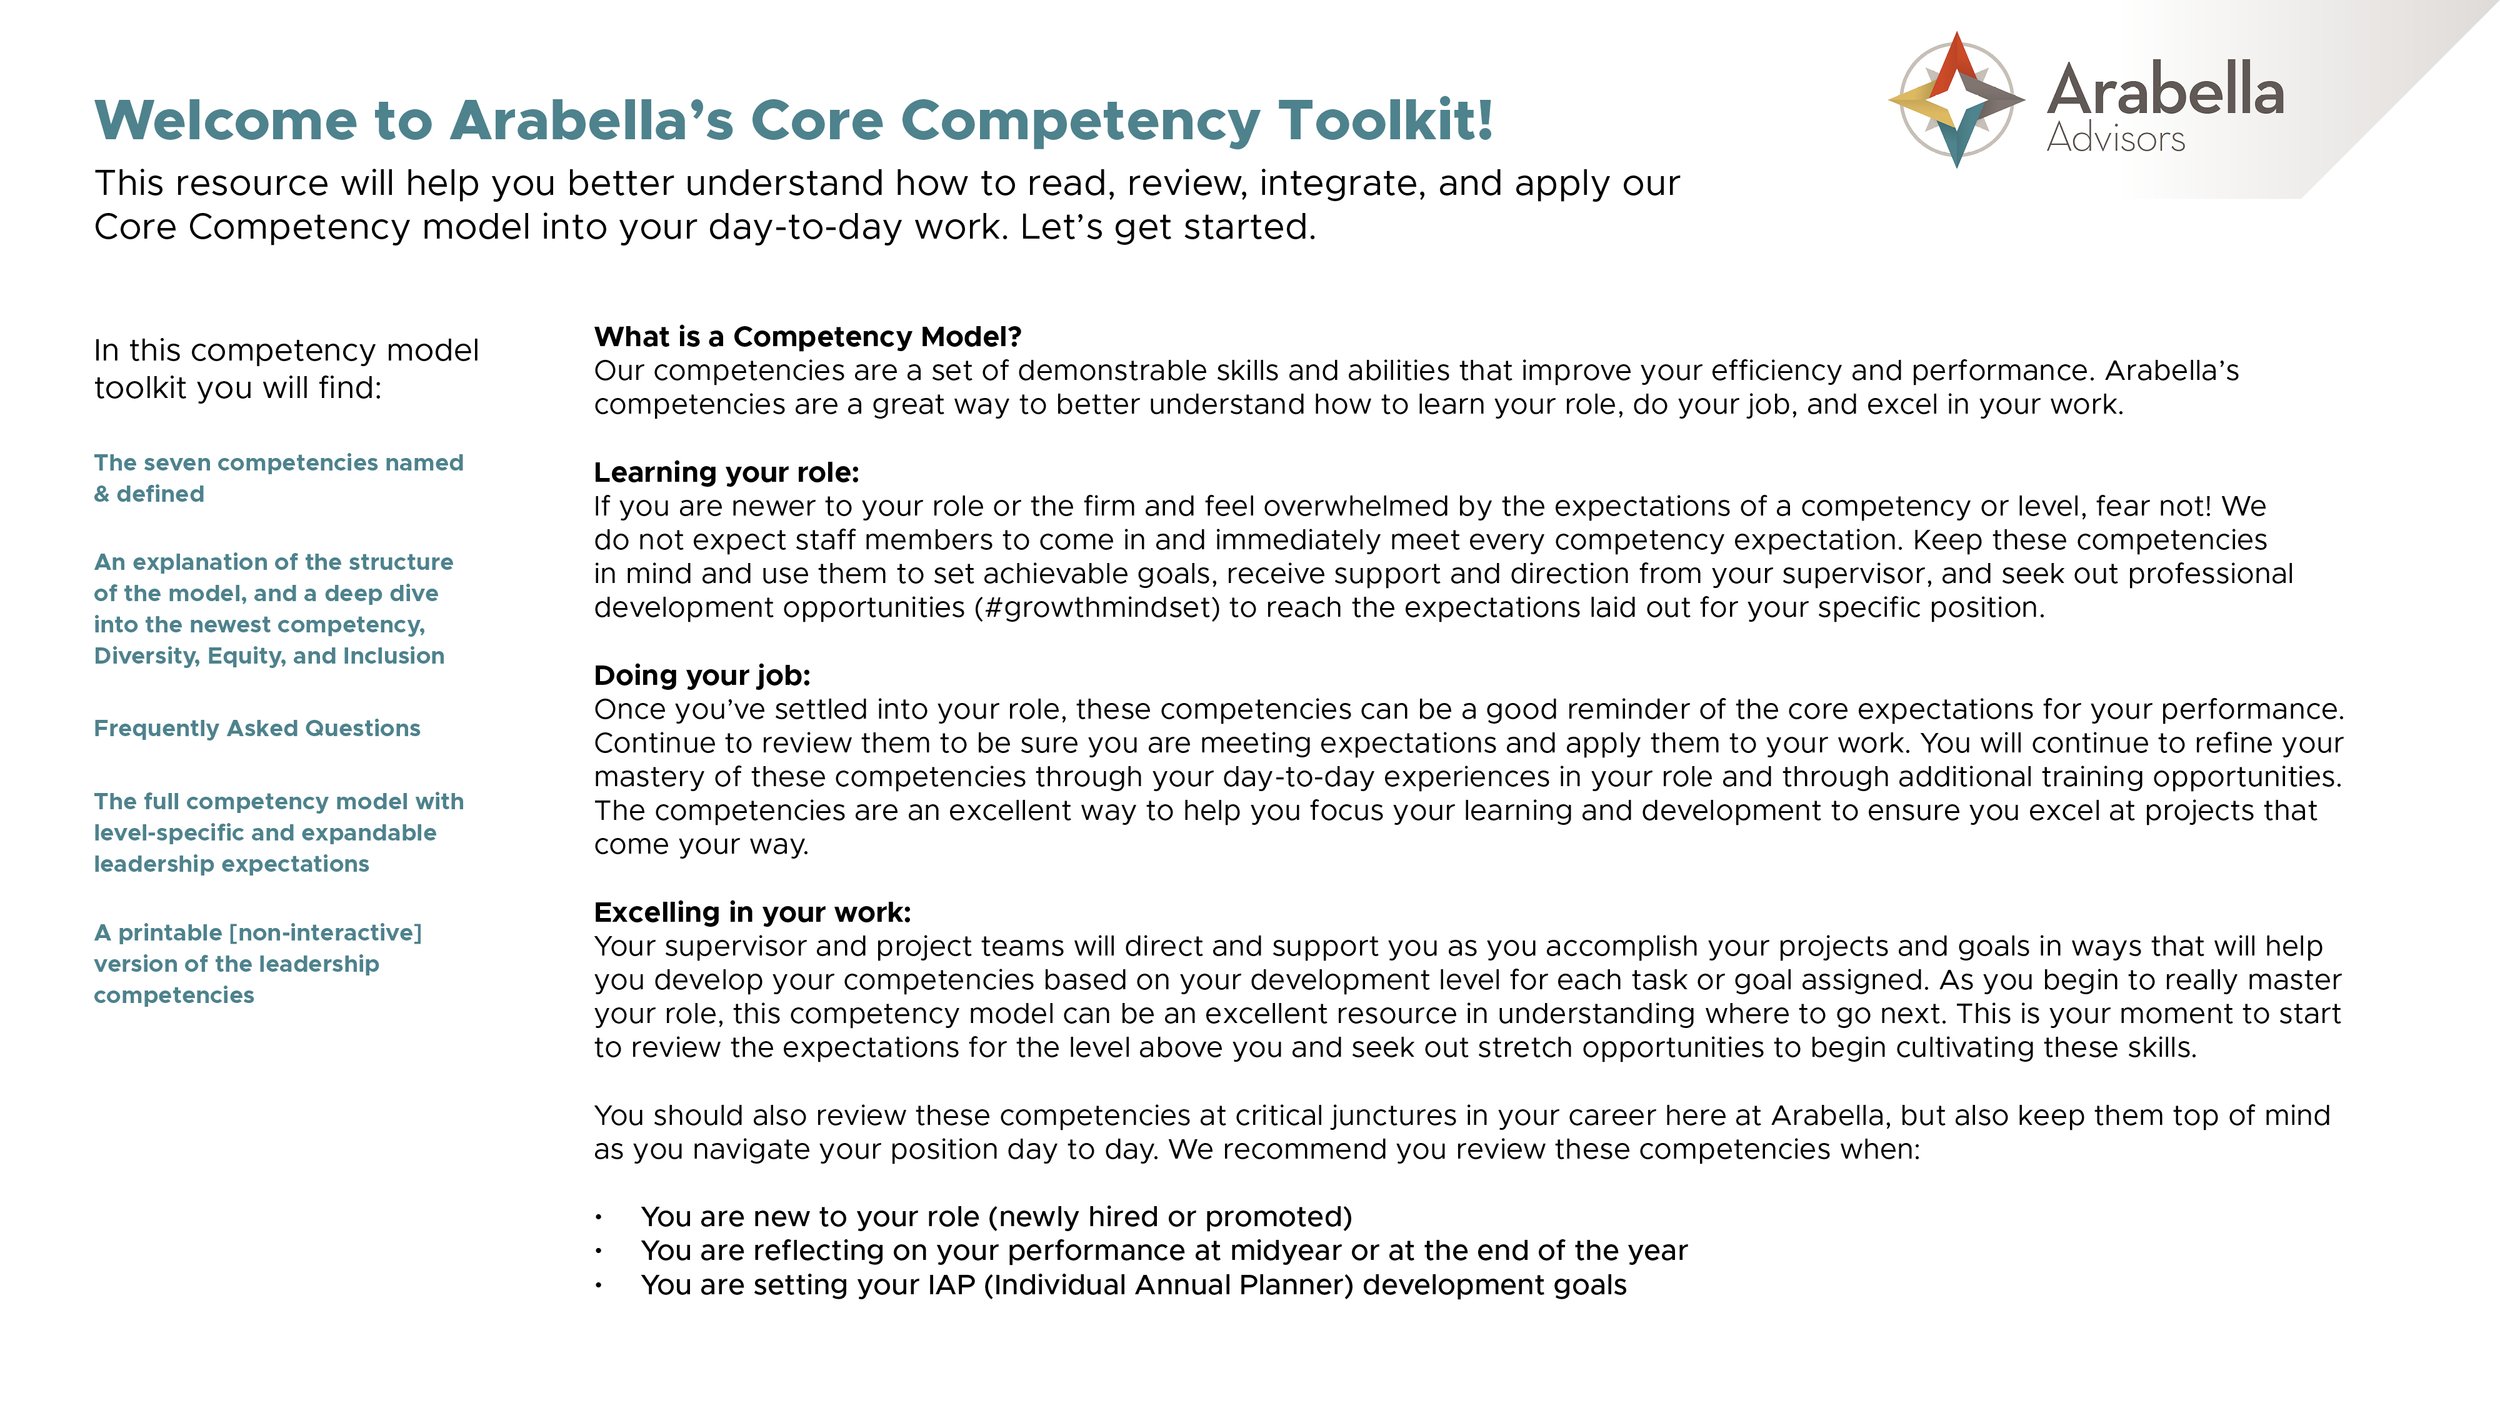 Arabella's Redesigned Competency Toolkit